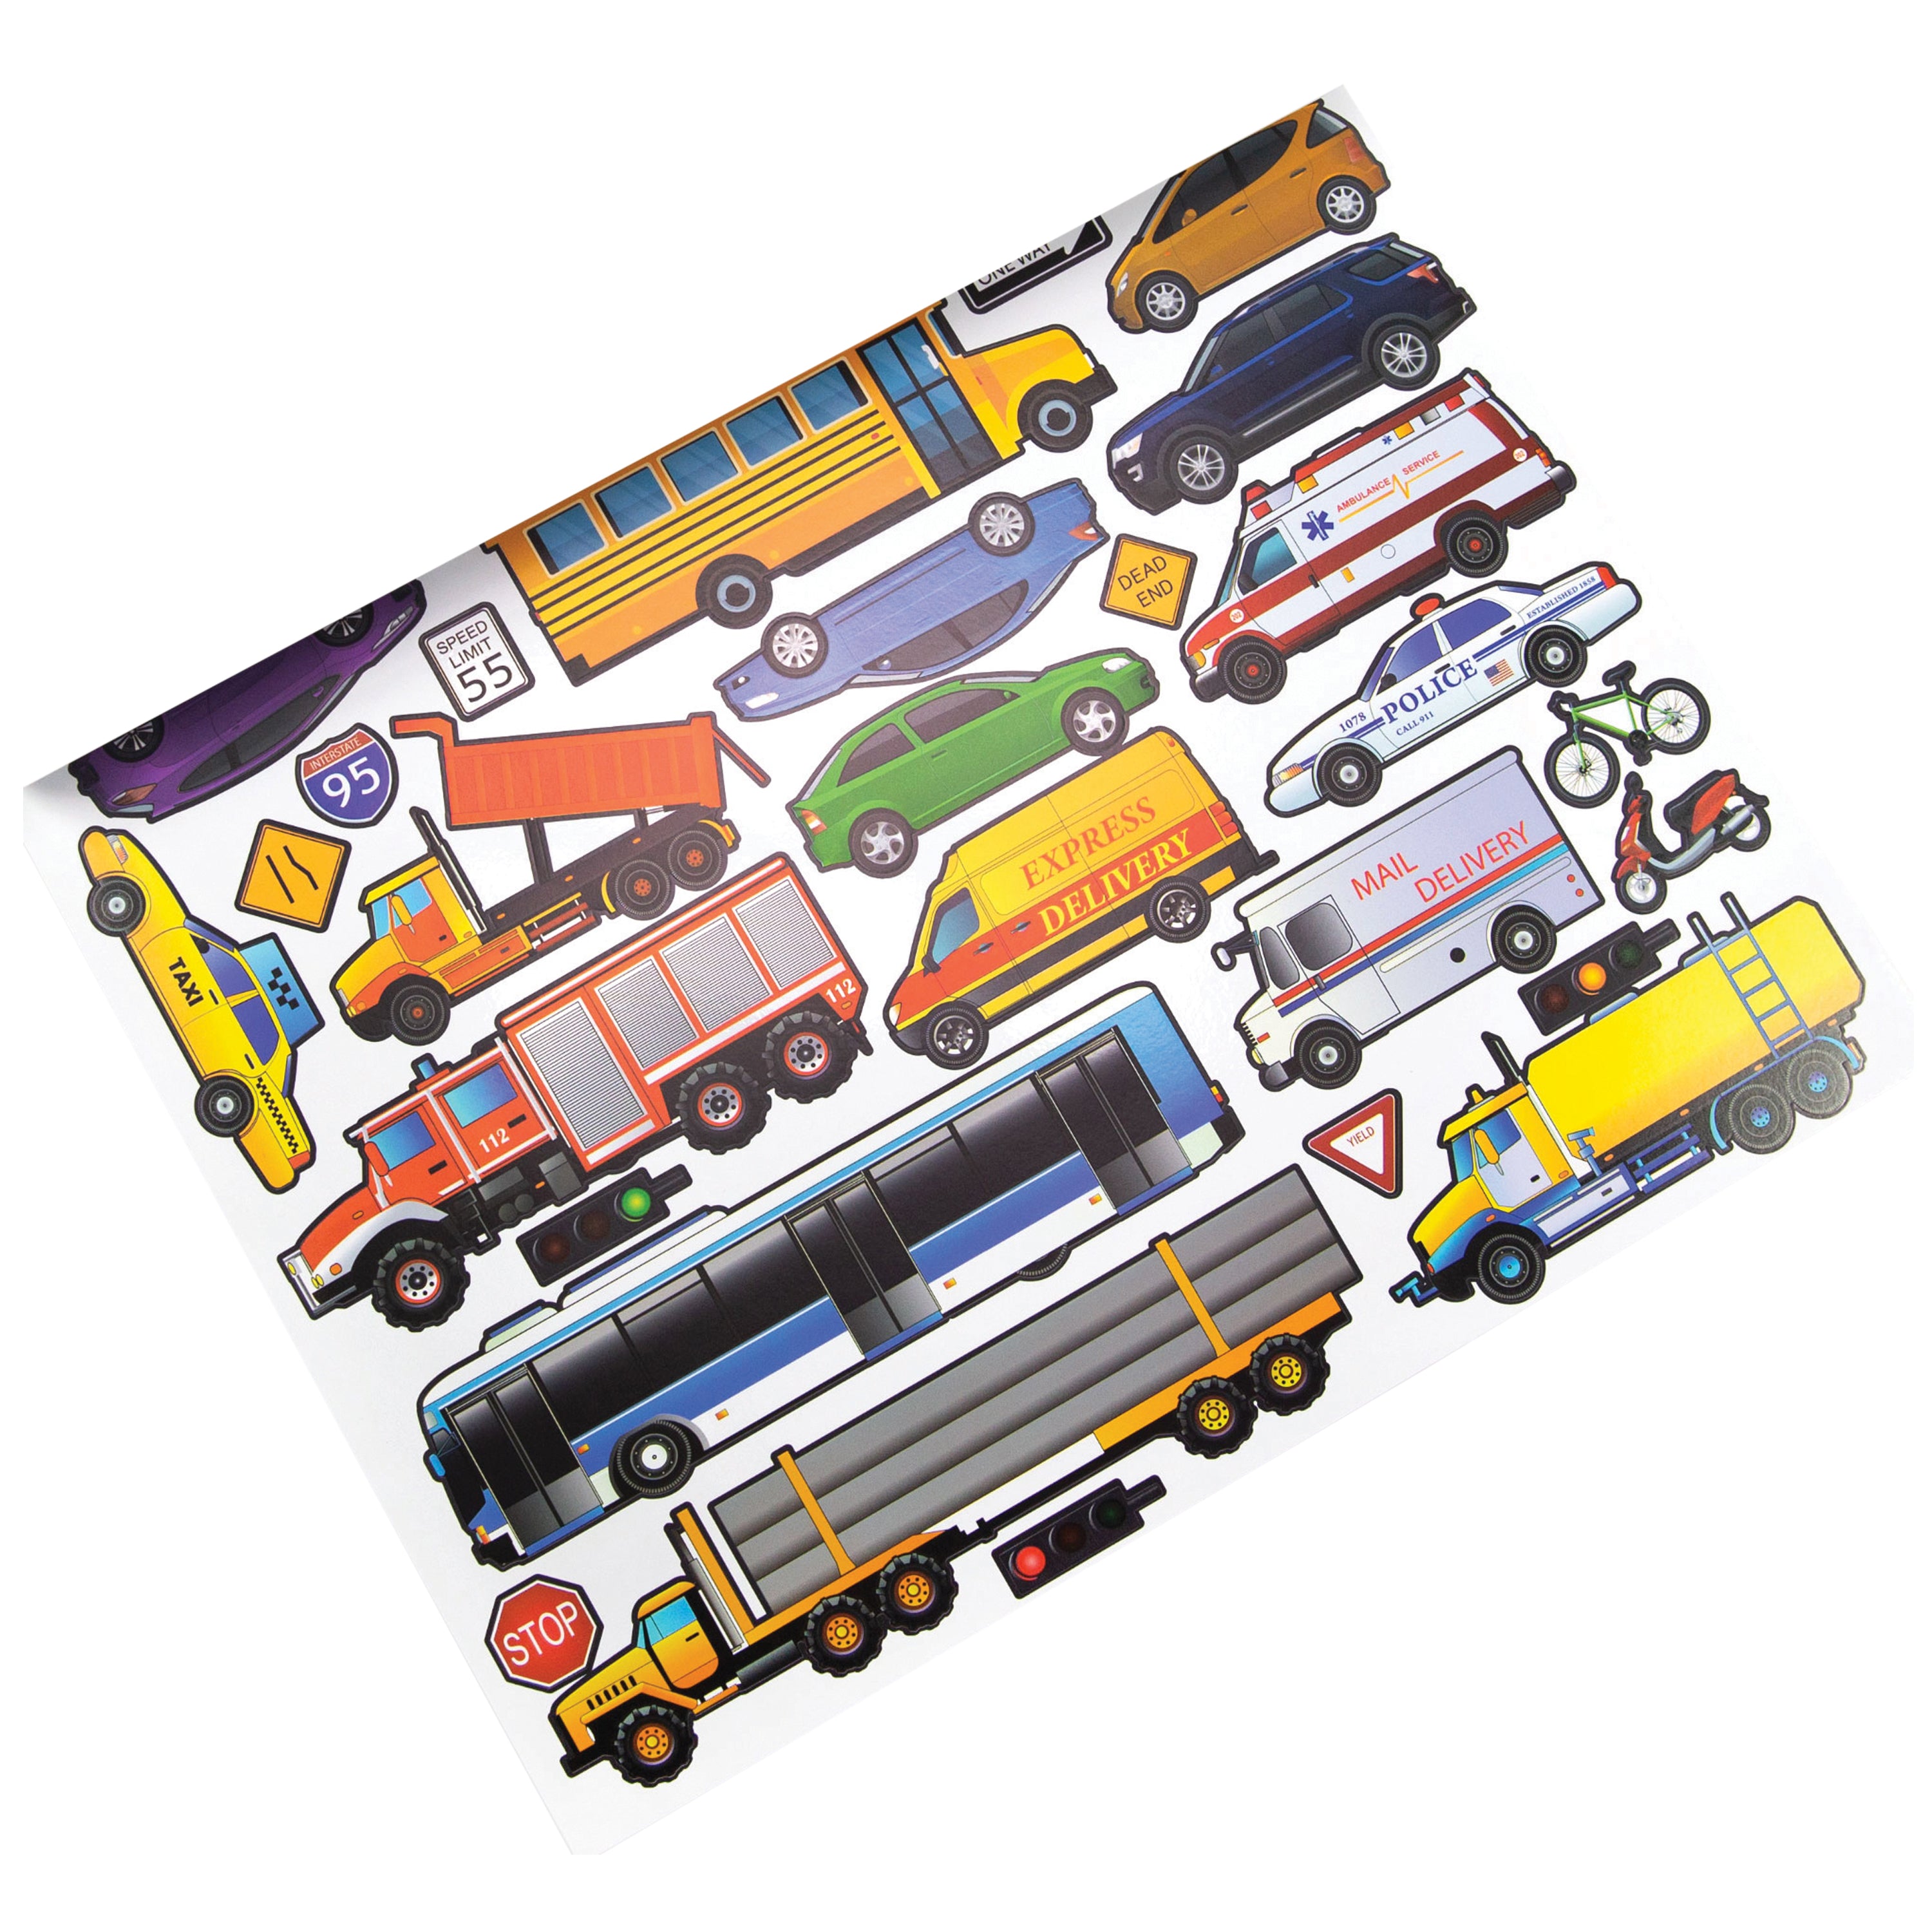 Assorted Colorful Robot Stickers (12 Pack)